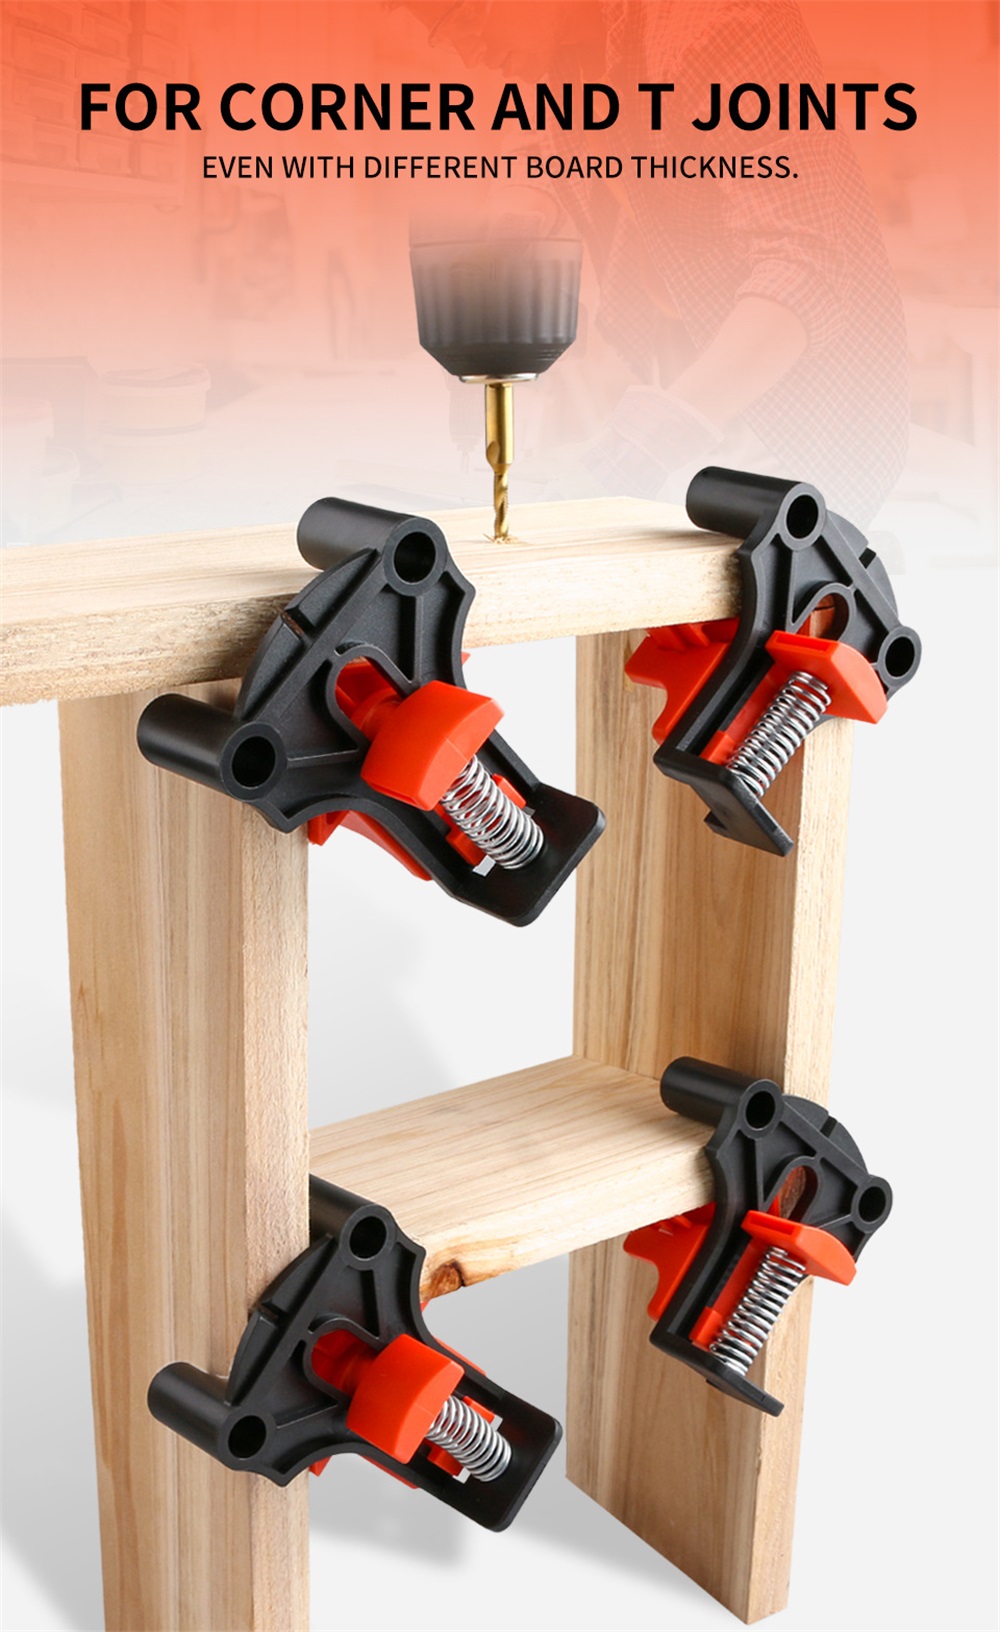 6090120-Degree-Right-Angle-Clamp-Angle-Mate-Woodworking-Hand-Fixing-Clips-Picture-Frame-Corner-Clip--1848026-4